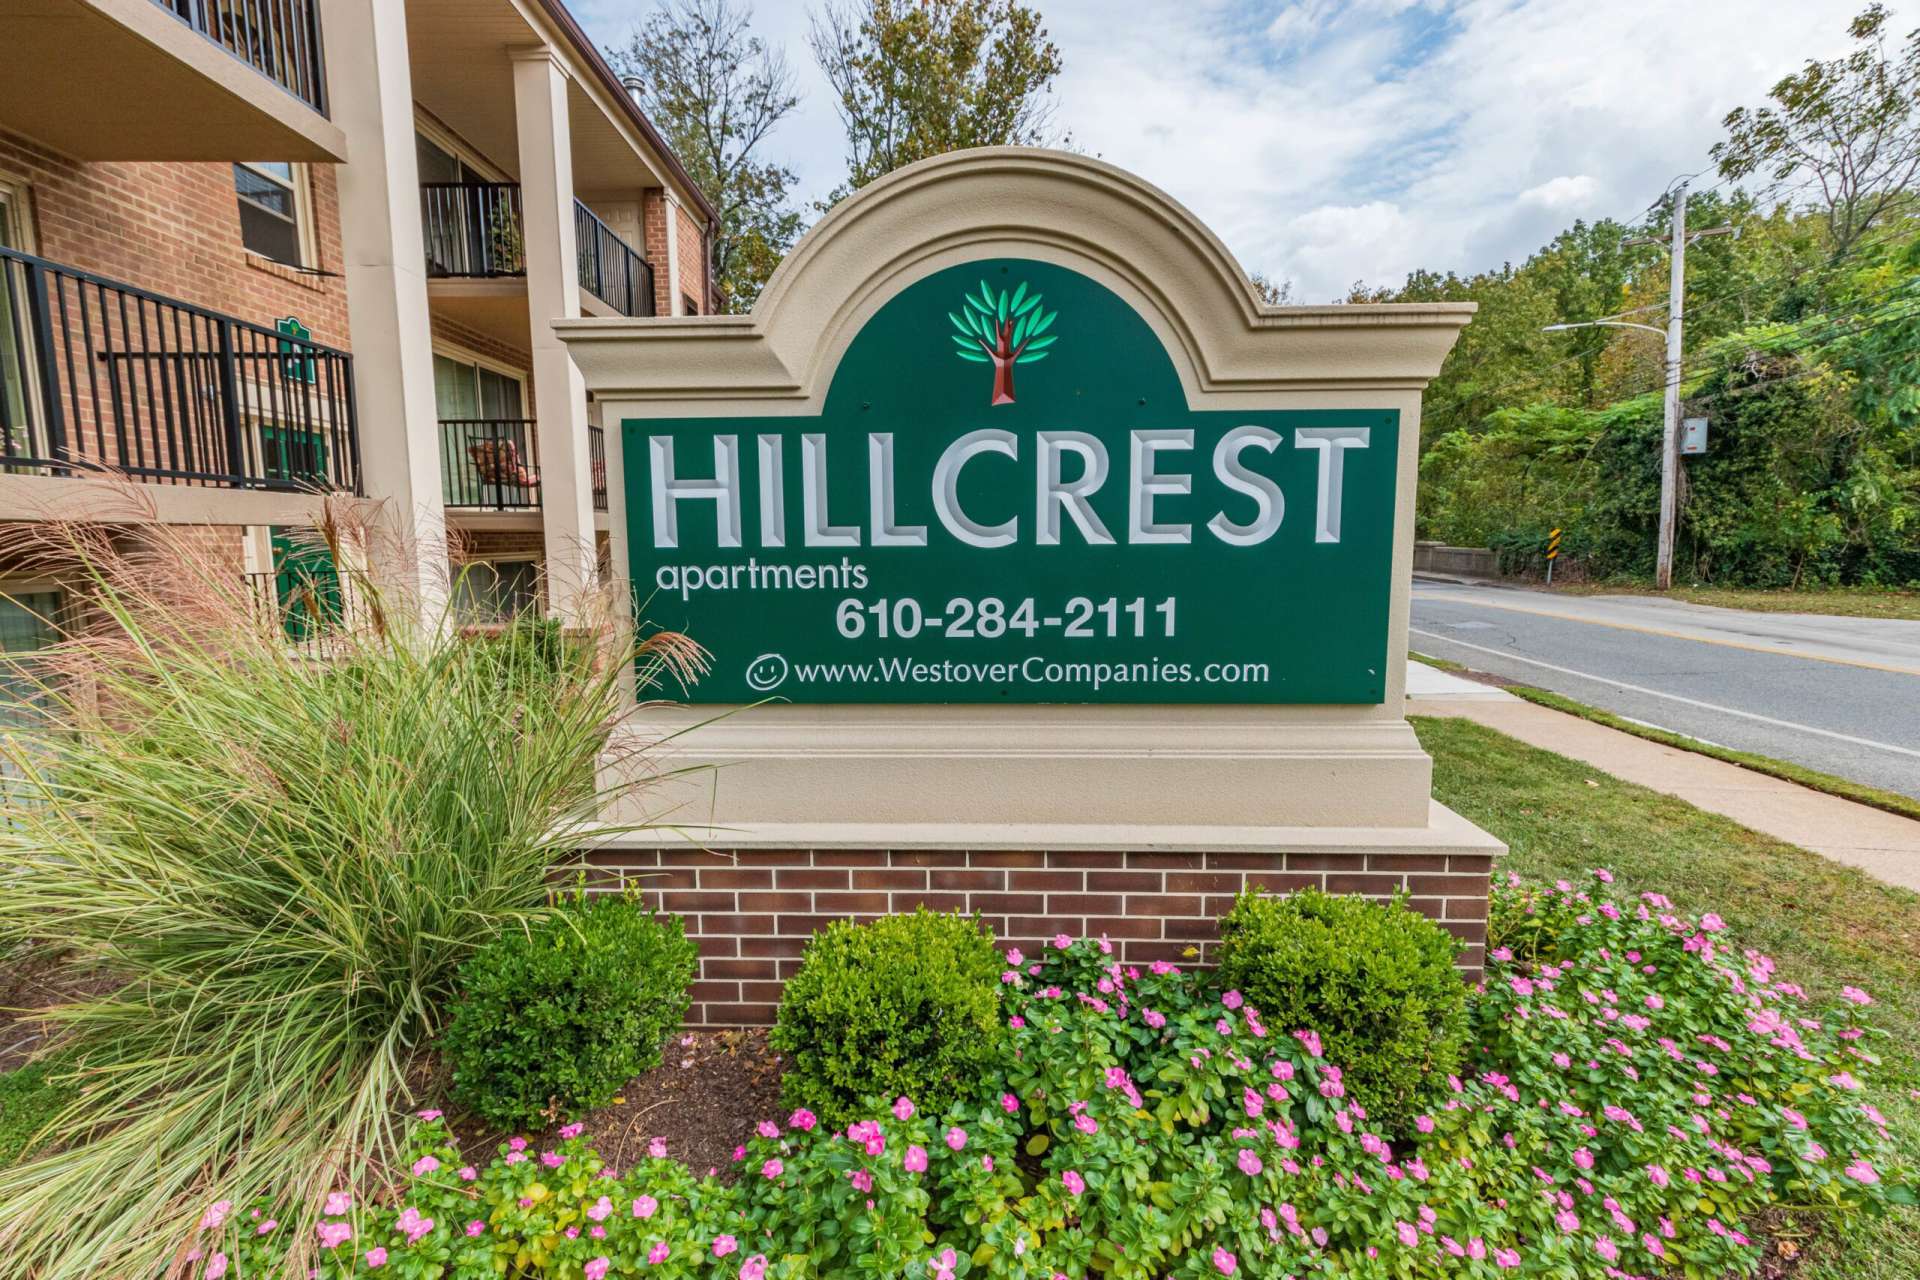 Hillcrest Apartments sign with pink flowers around the sign next to the road.